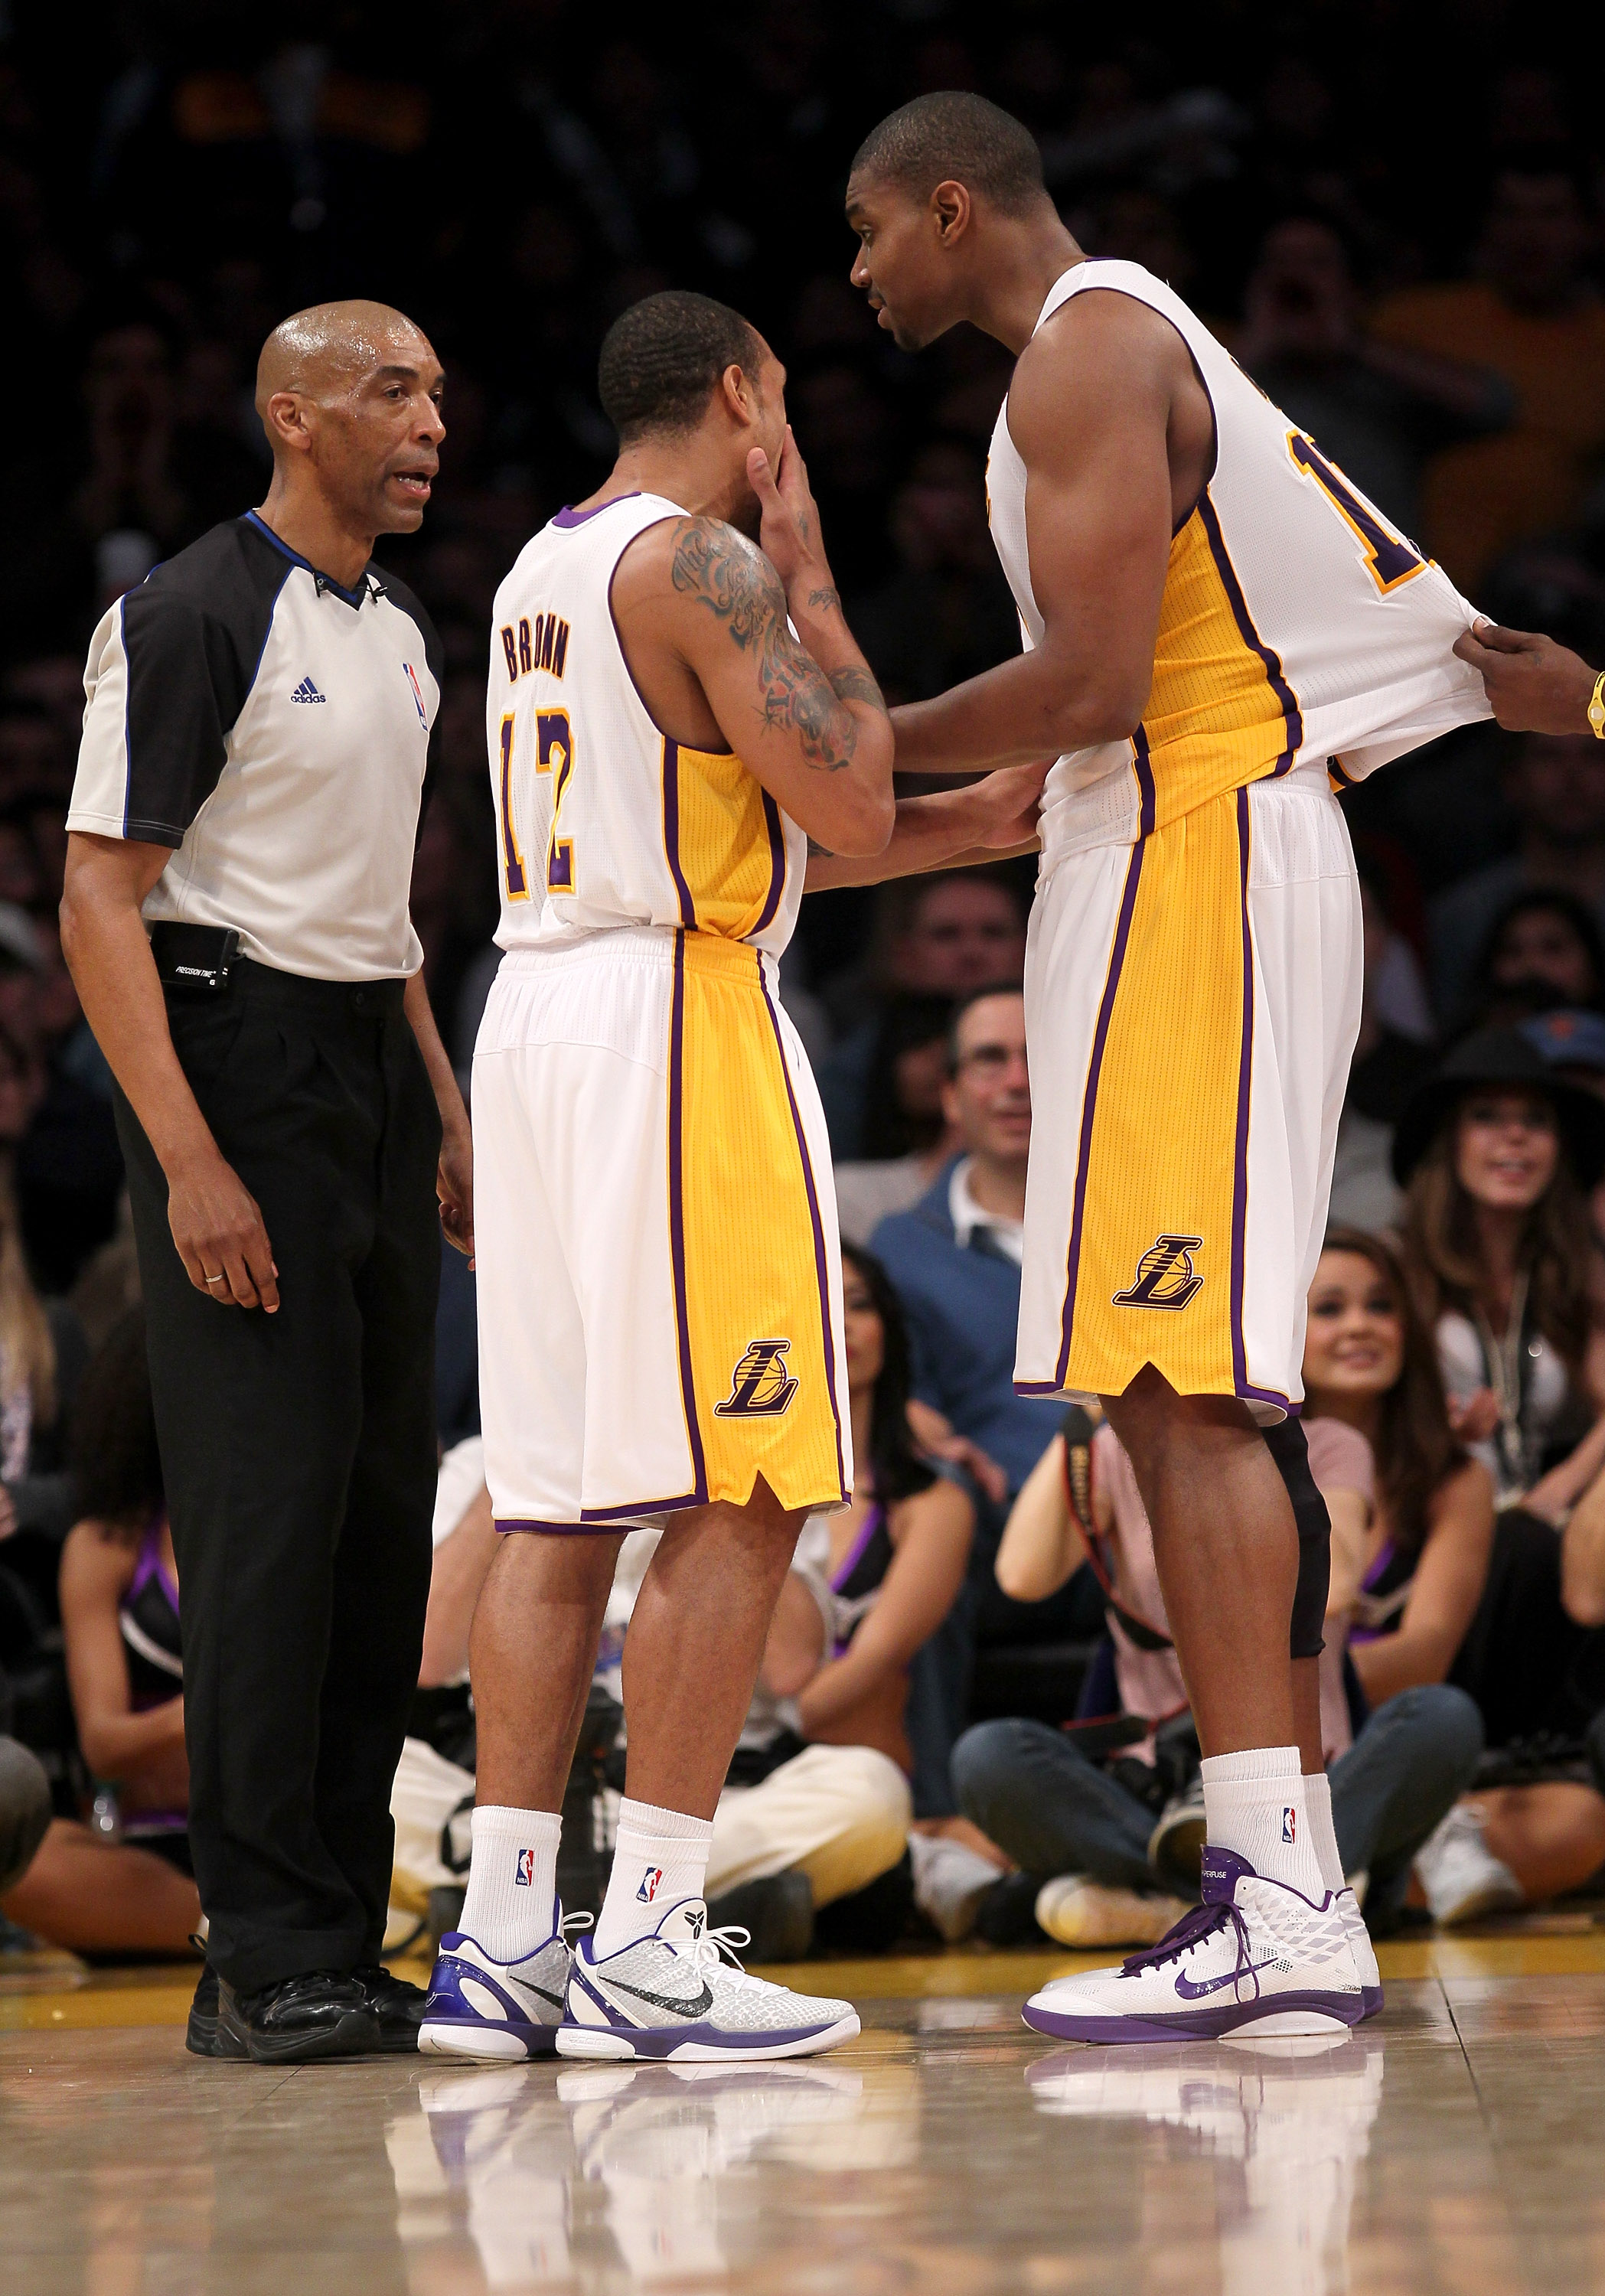 LOS ANGELES, CA - JANUARY 09:  Andrew Bynum #17 of the Los Angeles Lakers complains to  referee Tony Brown as Shannon Brown #12 in tries to intervene in the game against the New York Knicks at Staples Center on January 9, 2011 in Los Angeles, California.